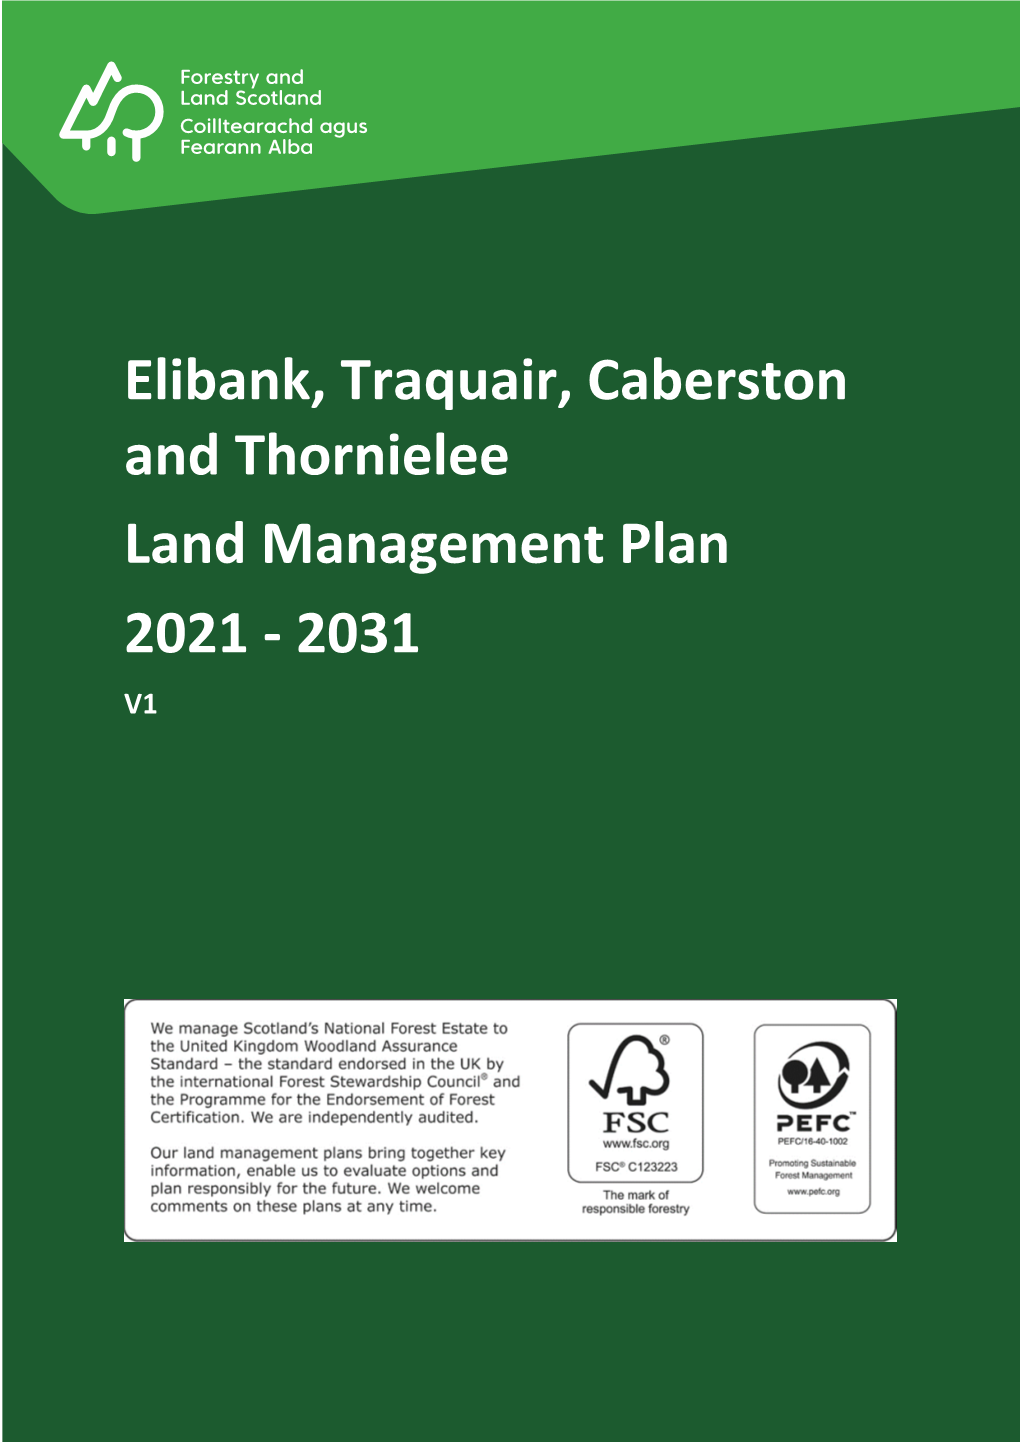 Elibank, Traquair, Caberston and Thornielee Land Management Plan 2021 - 2031 V1